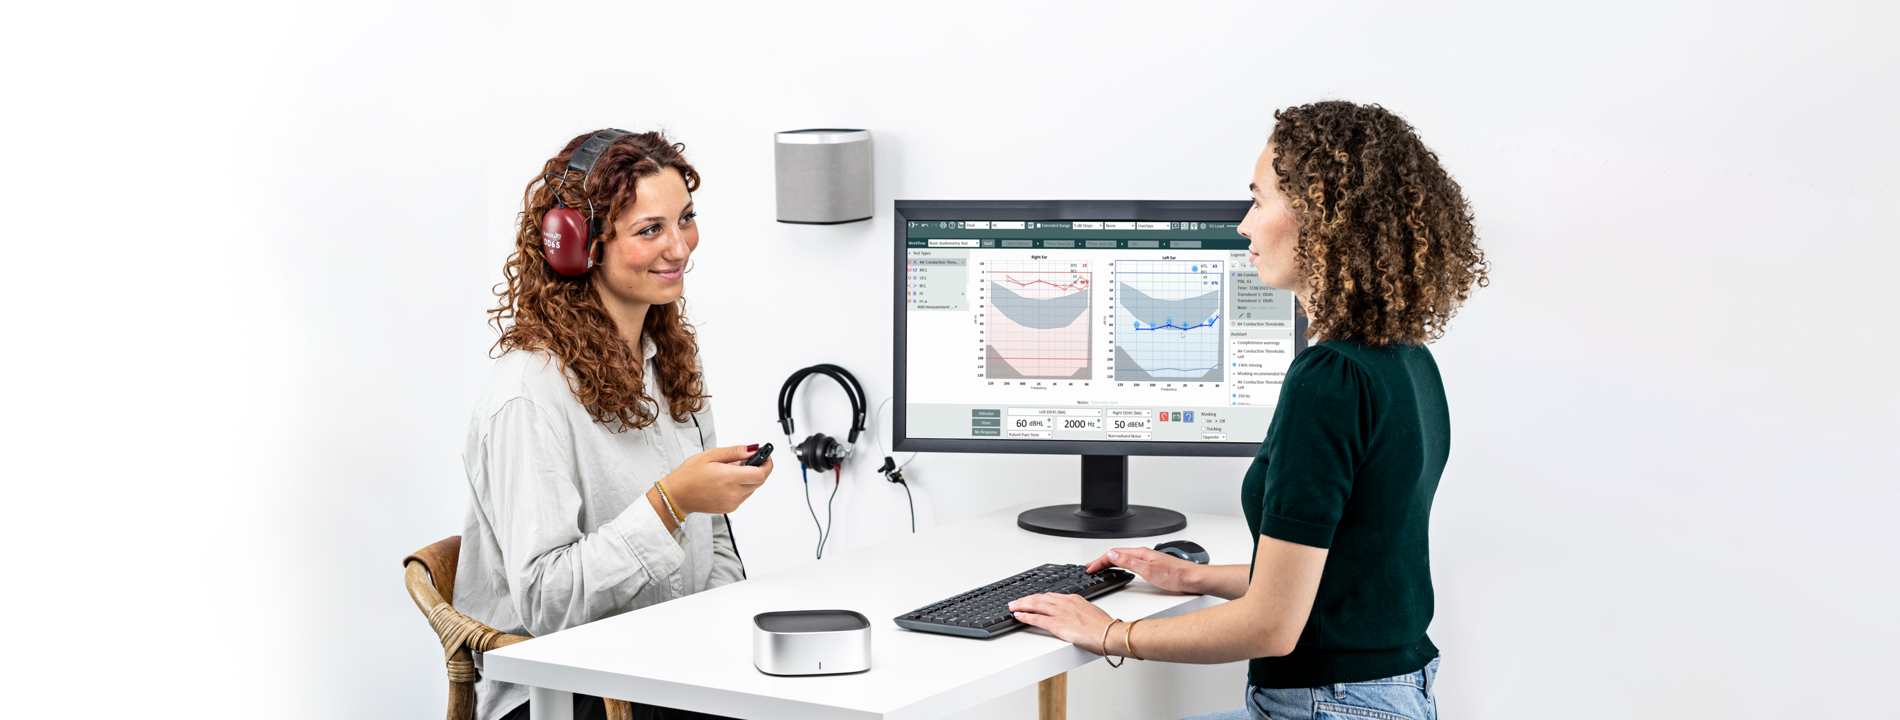 Measure Software - Pure-tone audiometry screen - audiologist sitting with patient